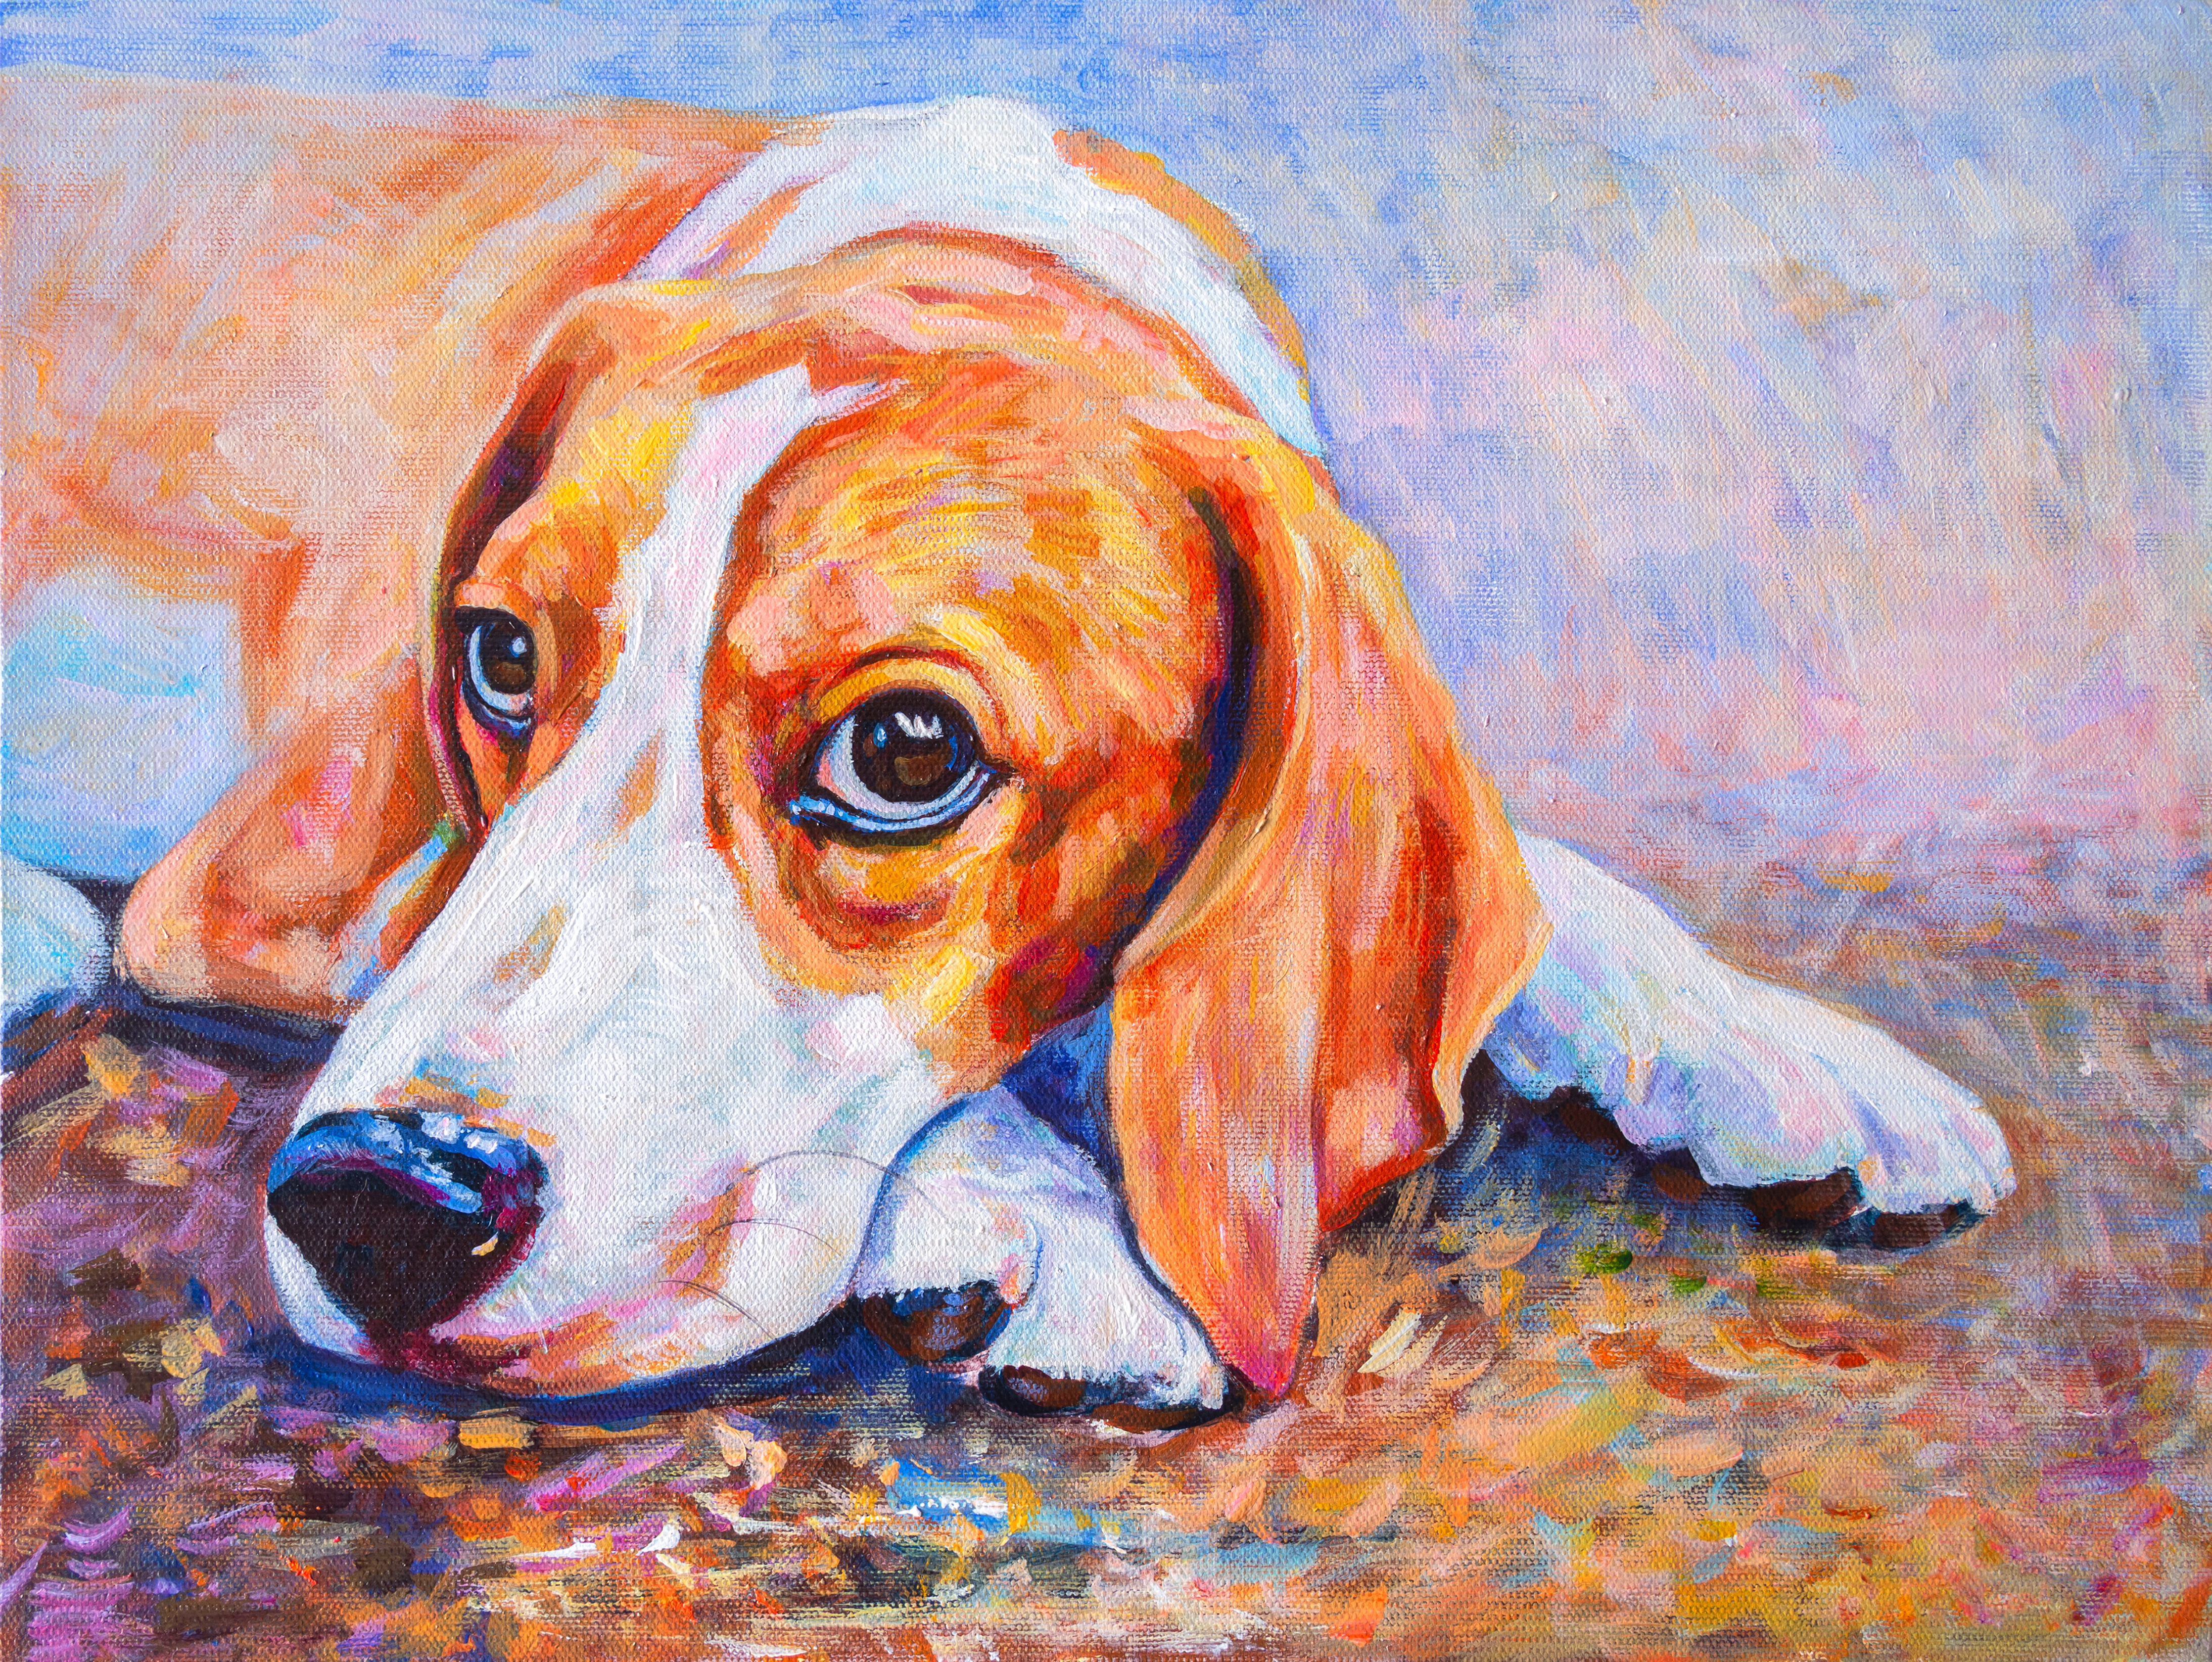 Acrylic color painting of a beagle dog lying on the ground on canvas.  Previously downloaded S M L XL 4377 x 3288 px (14.59 x 10.96 in.) - 300 dpi - RGB You’ve downloaded this photo before, so you won’t be charged again. Re-download for free By clicking “